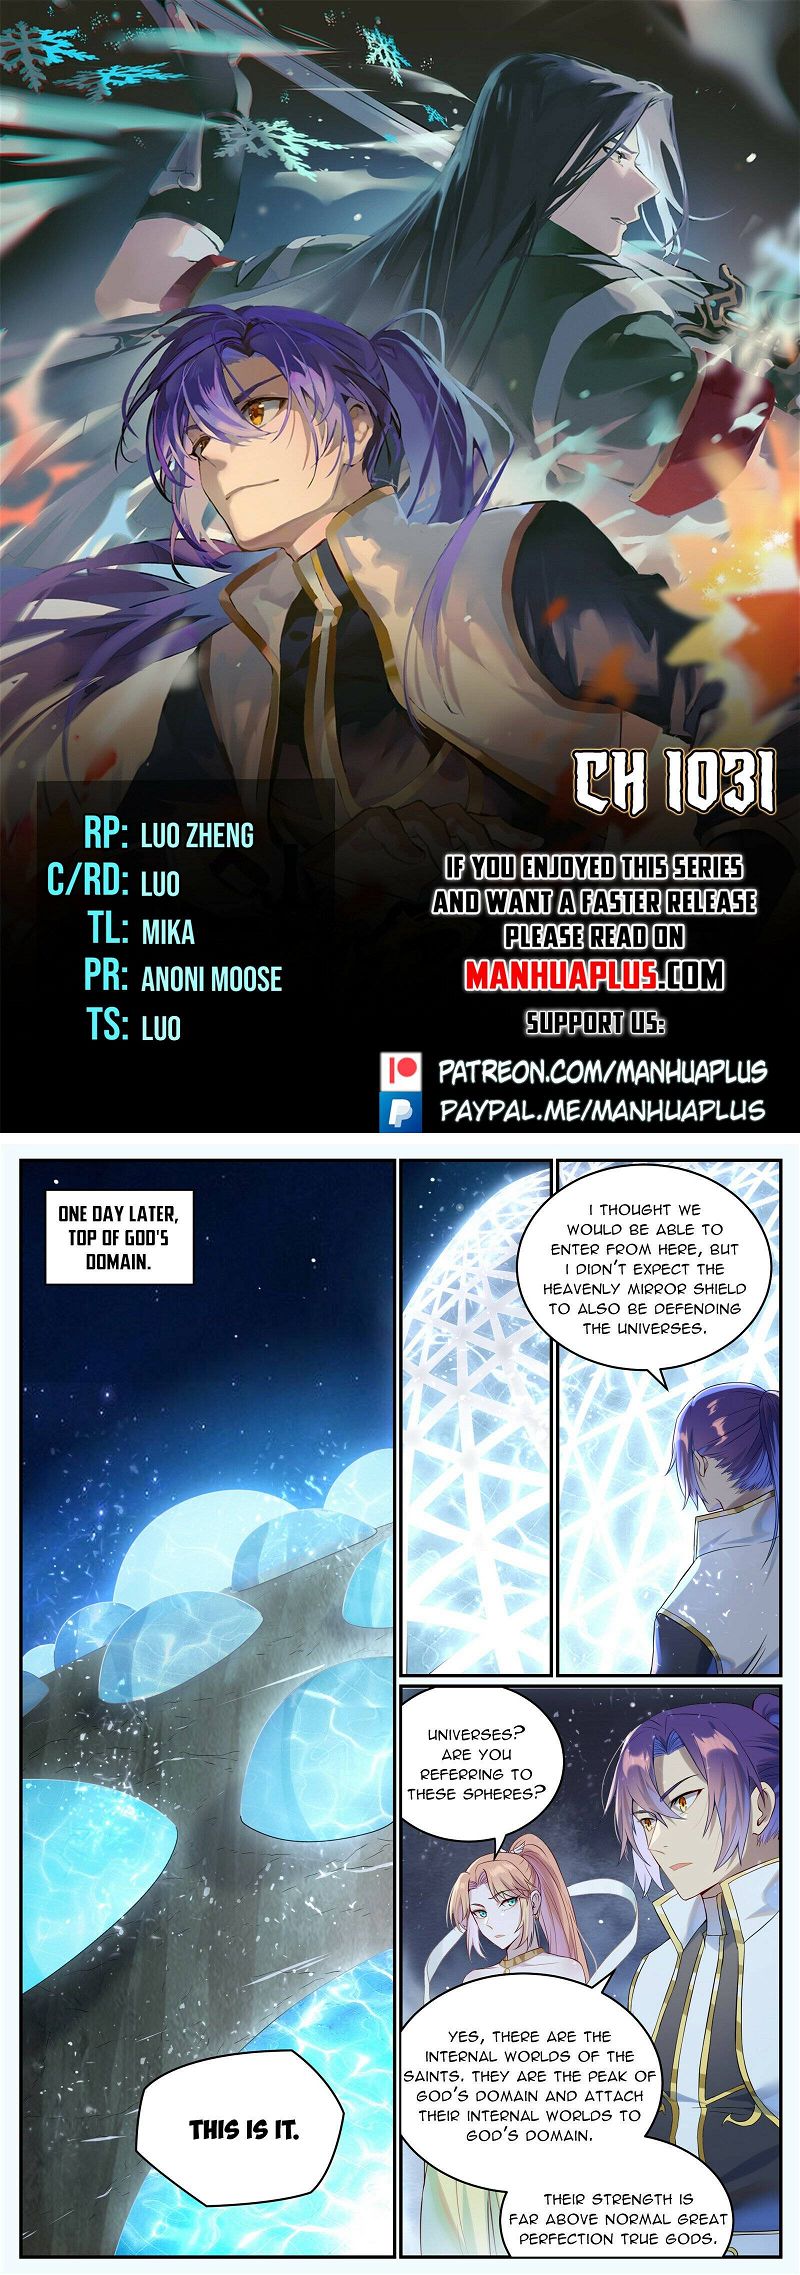 Apotheosis – Ascension to Godhood Chapter 1031 page 1 - MangaWeebs.in